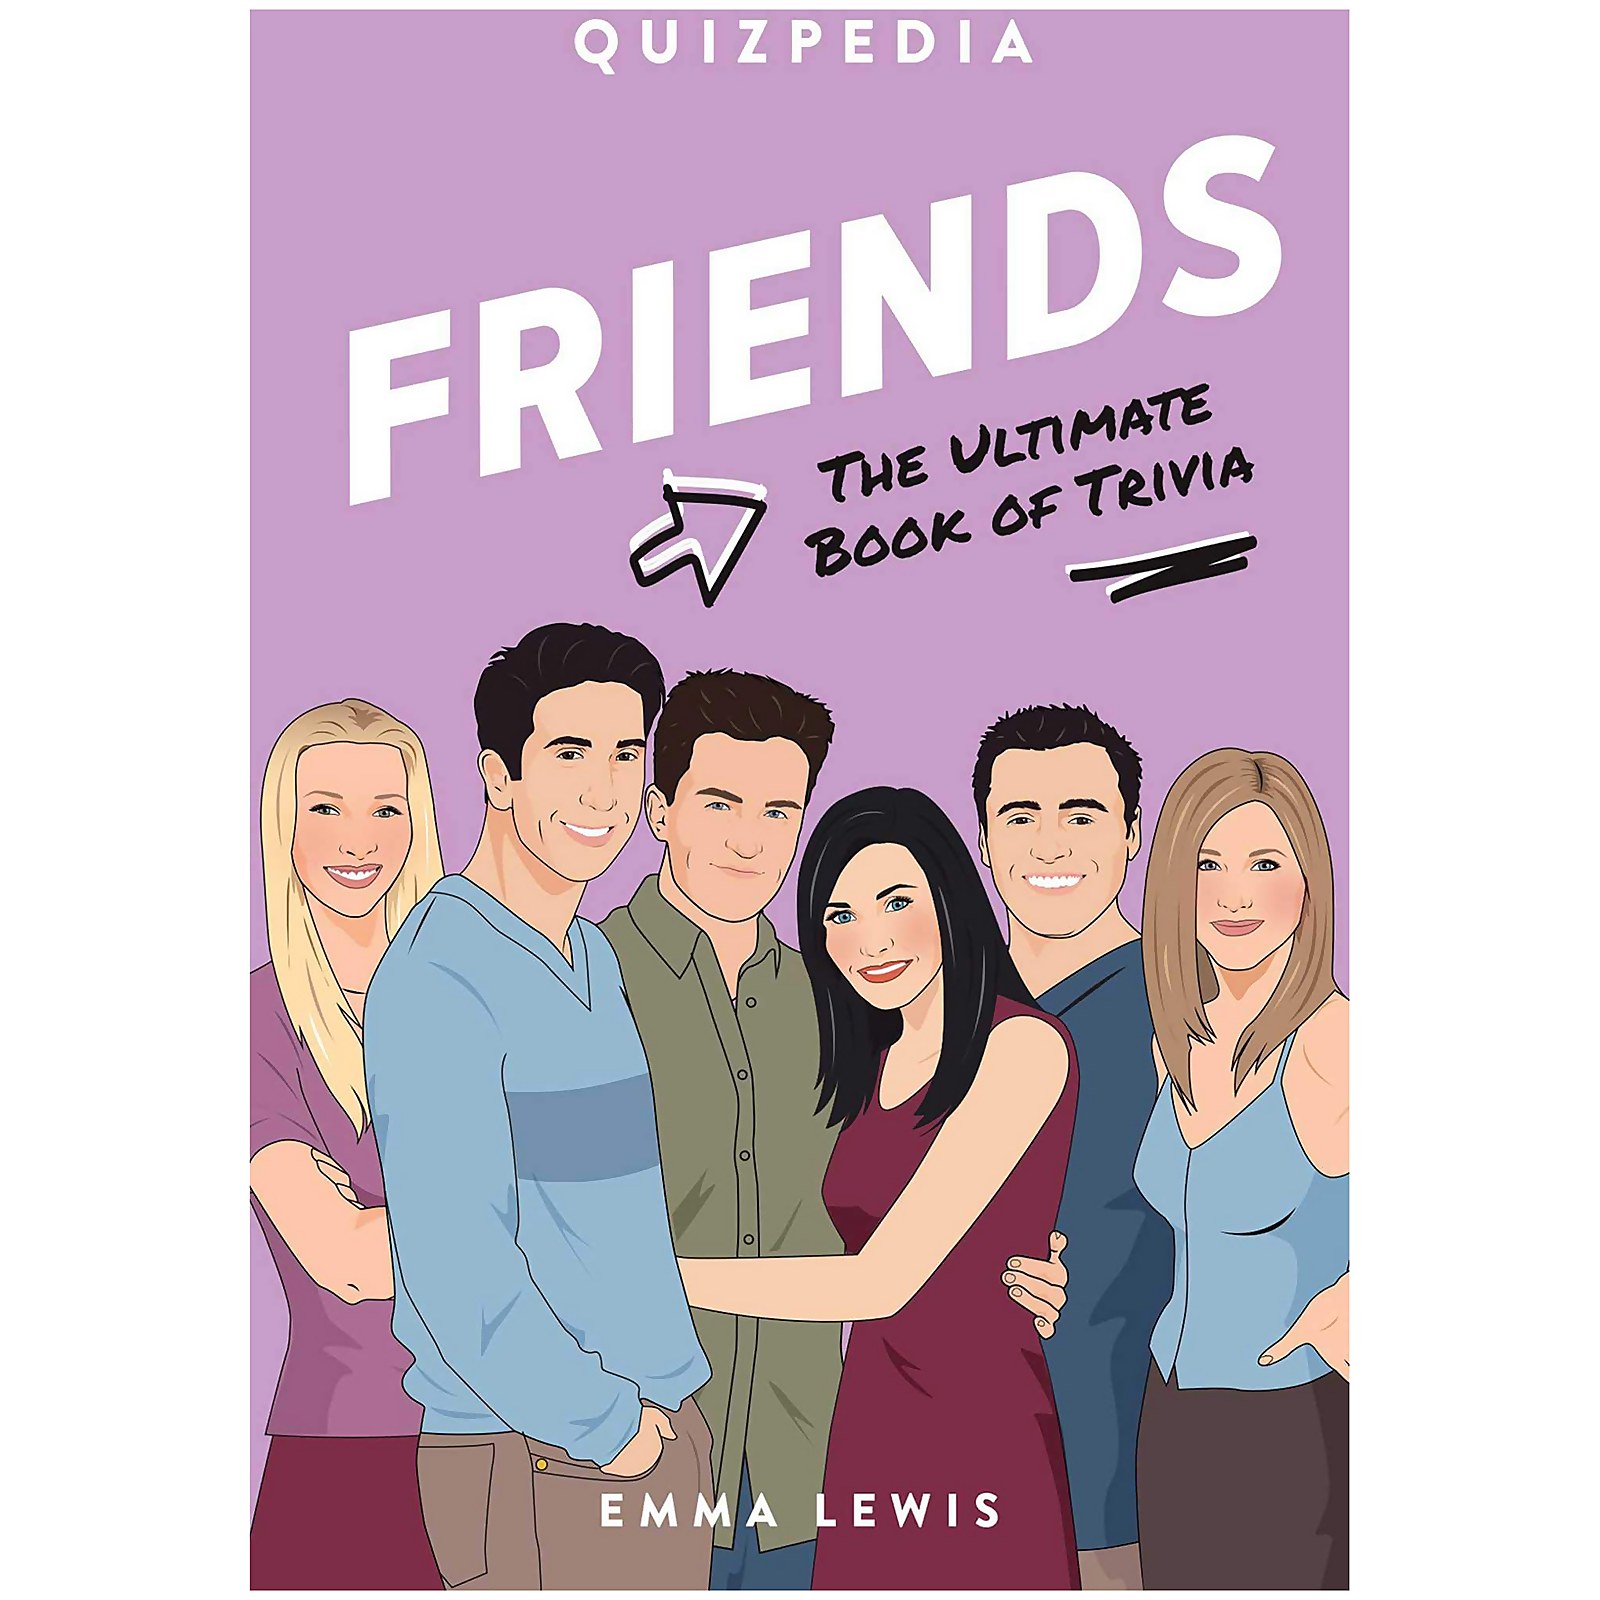 Image of Friends Quizpedia: The Ultimate Book of Trivia